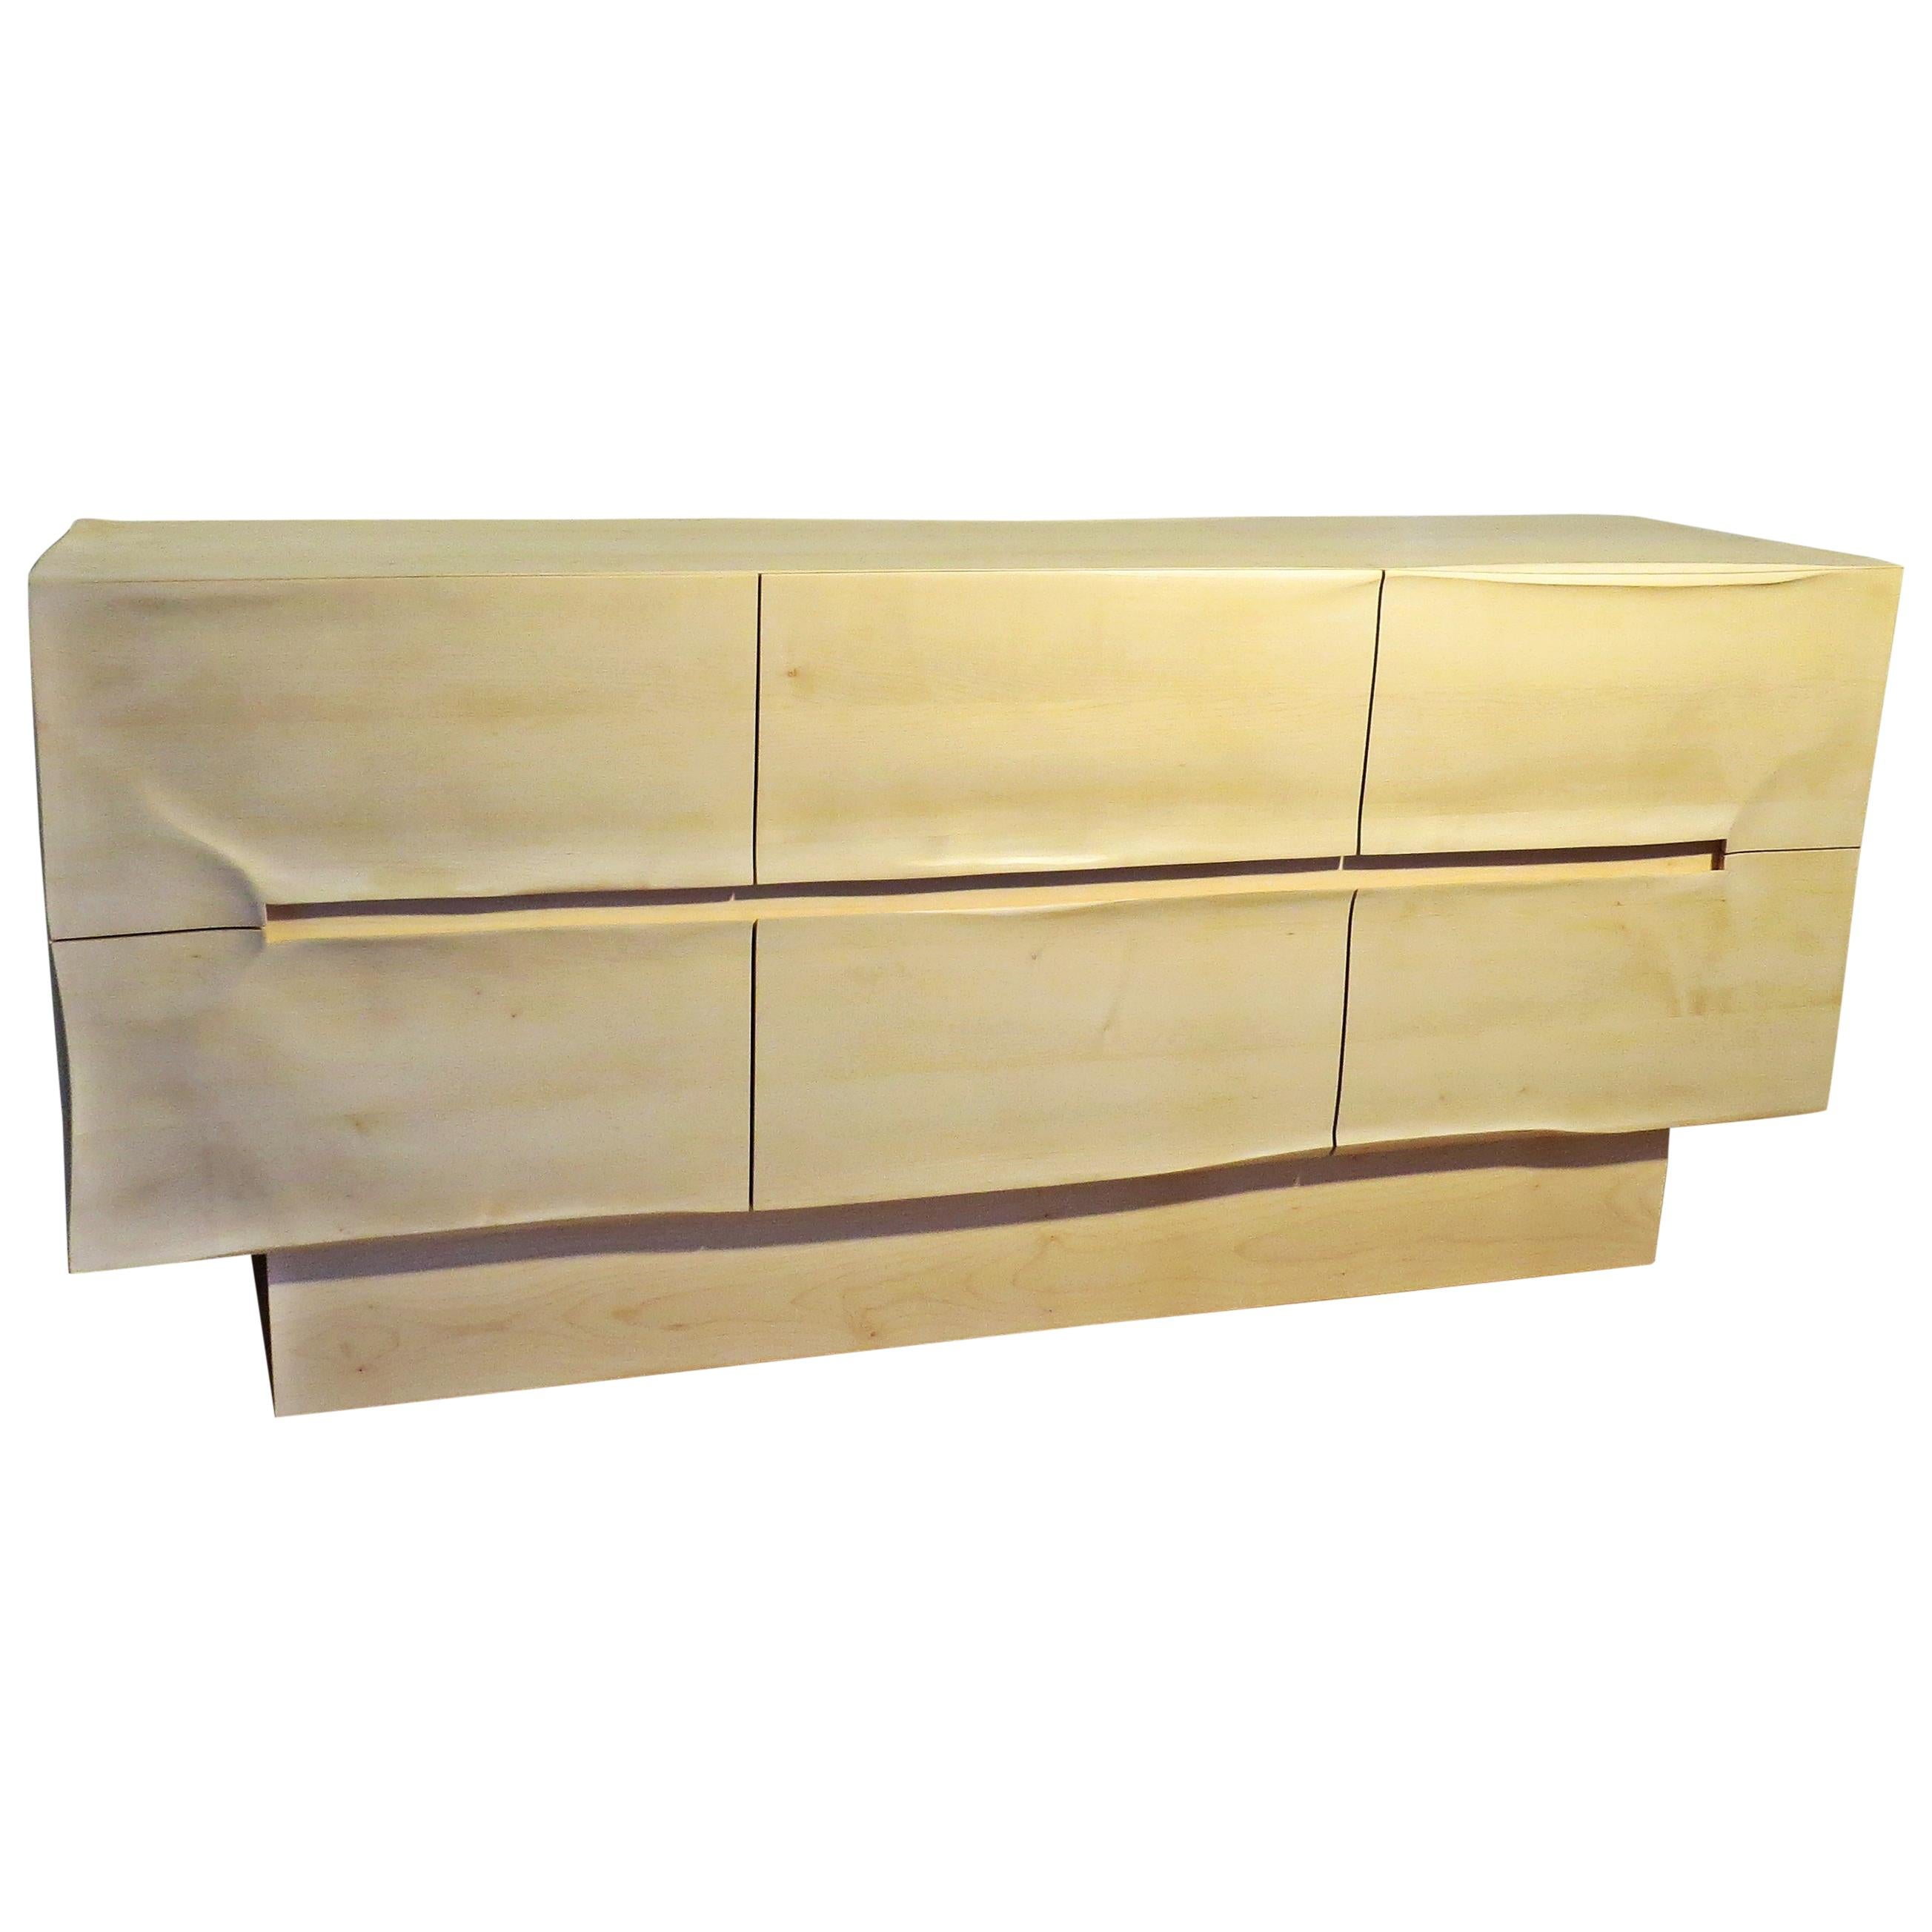 Sideboard Solid Wood in Organic Design, Handcrafted in Germany, sculptural  For Sale